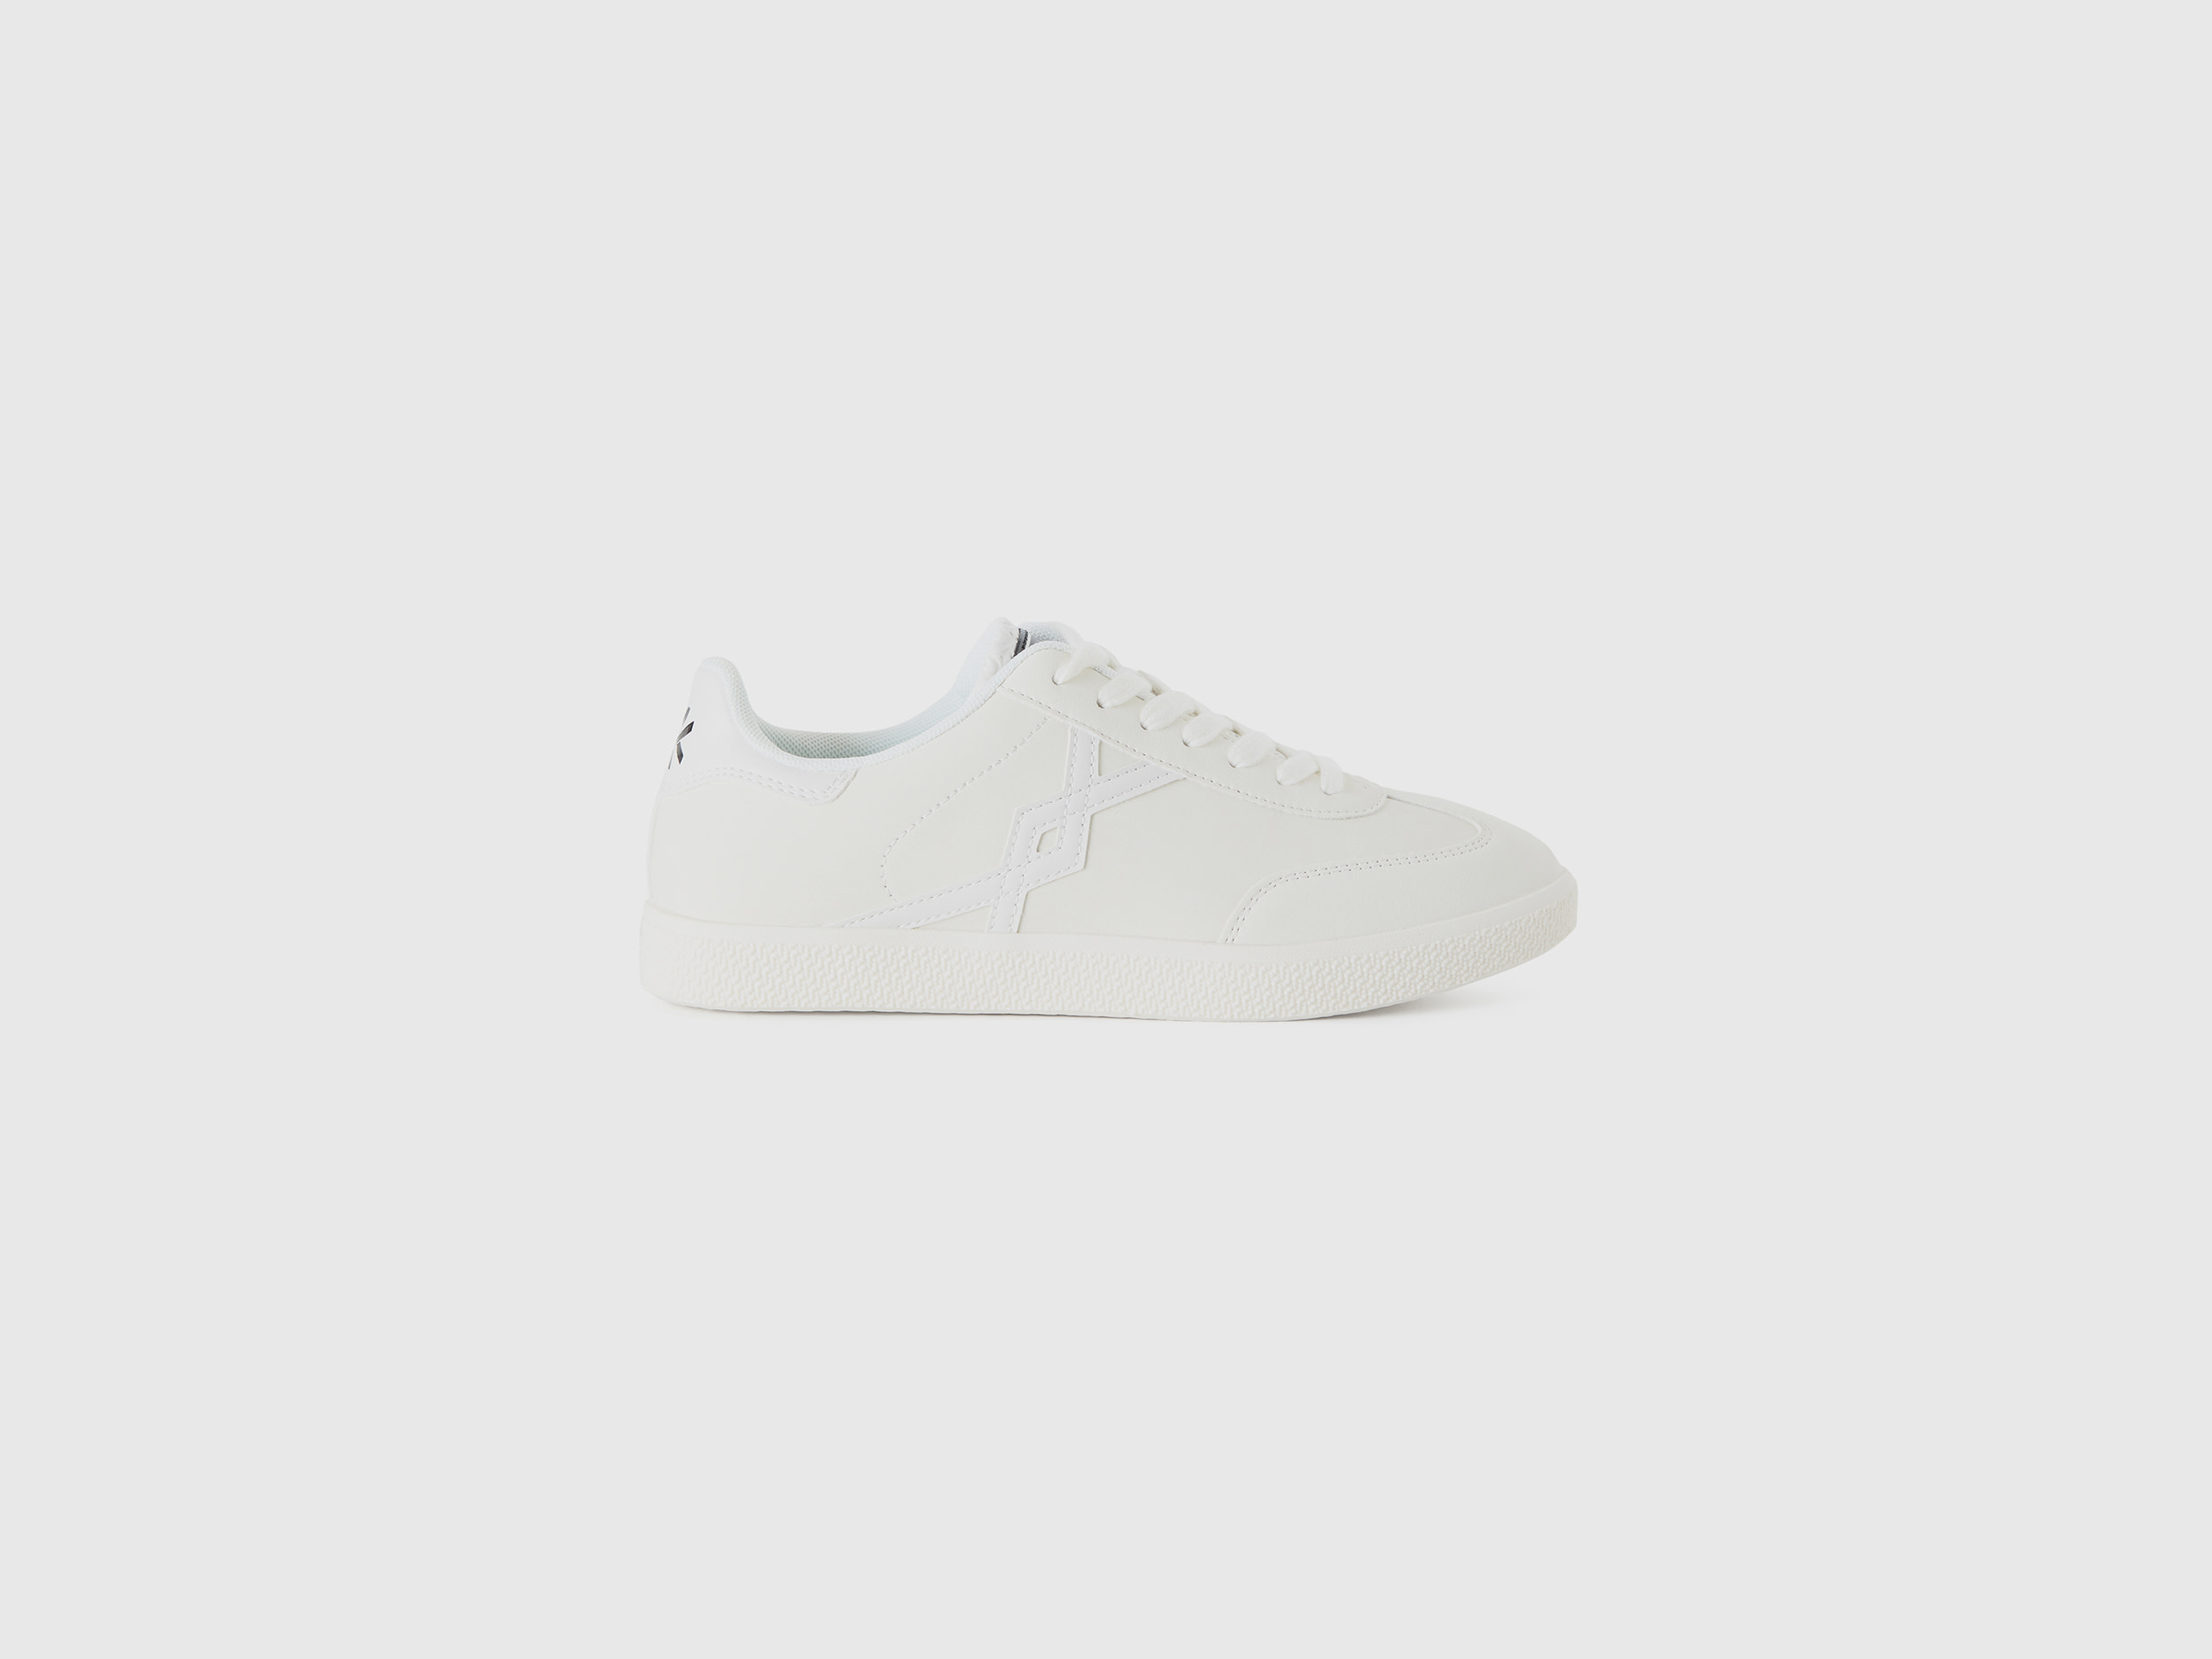 Benetton, Low-top Sneakers In Imitation Leather, size 2,5, Creamy White, Women